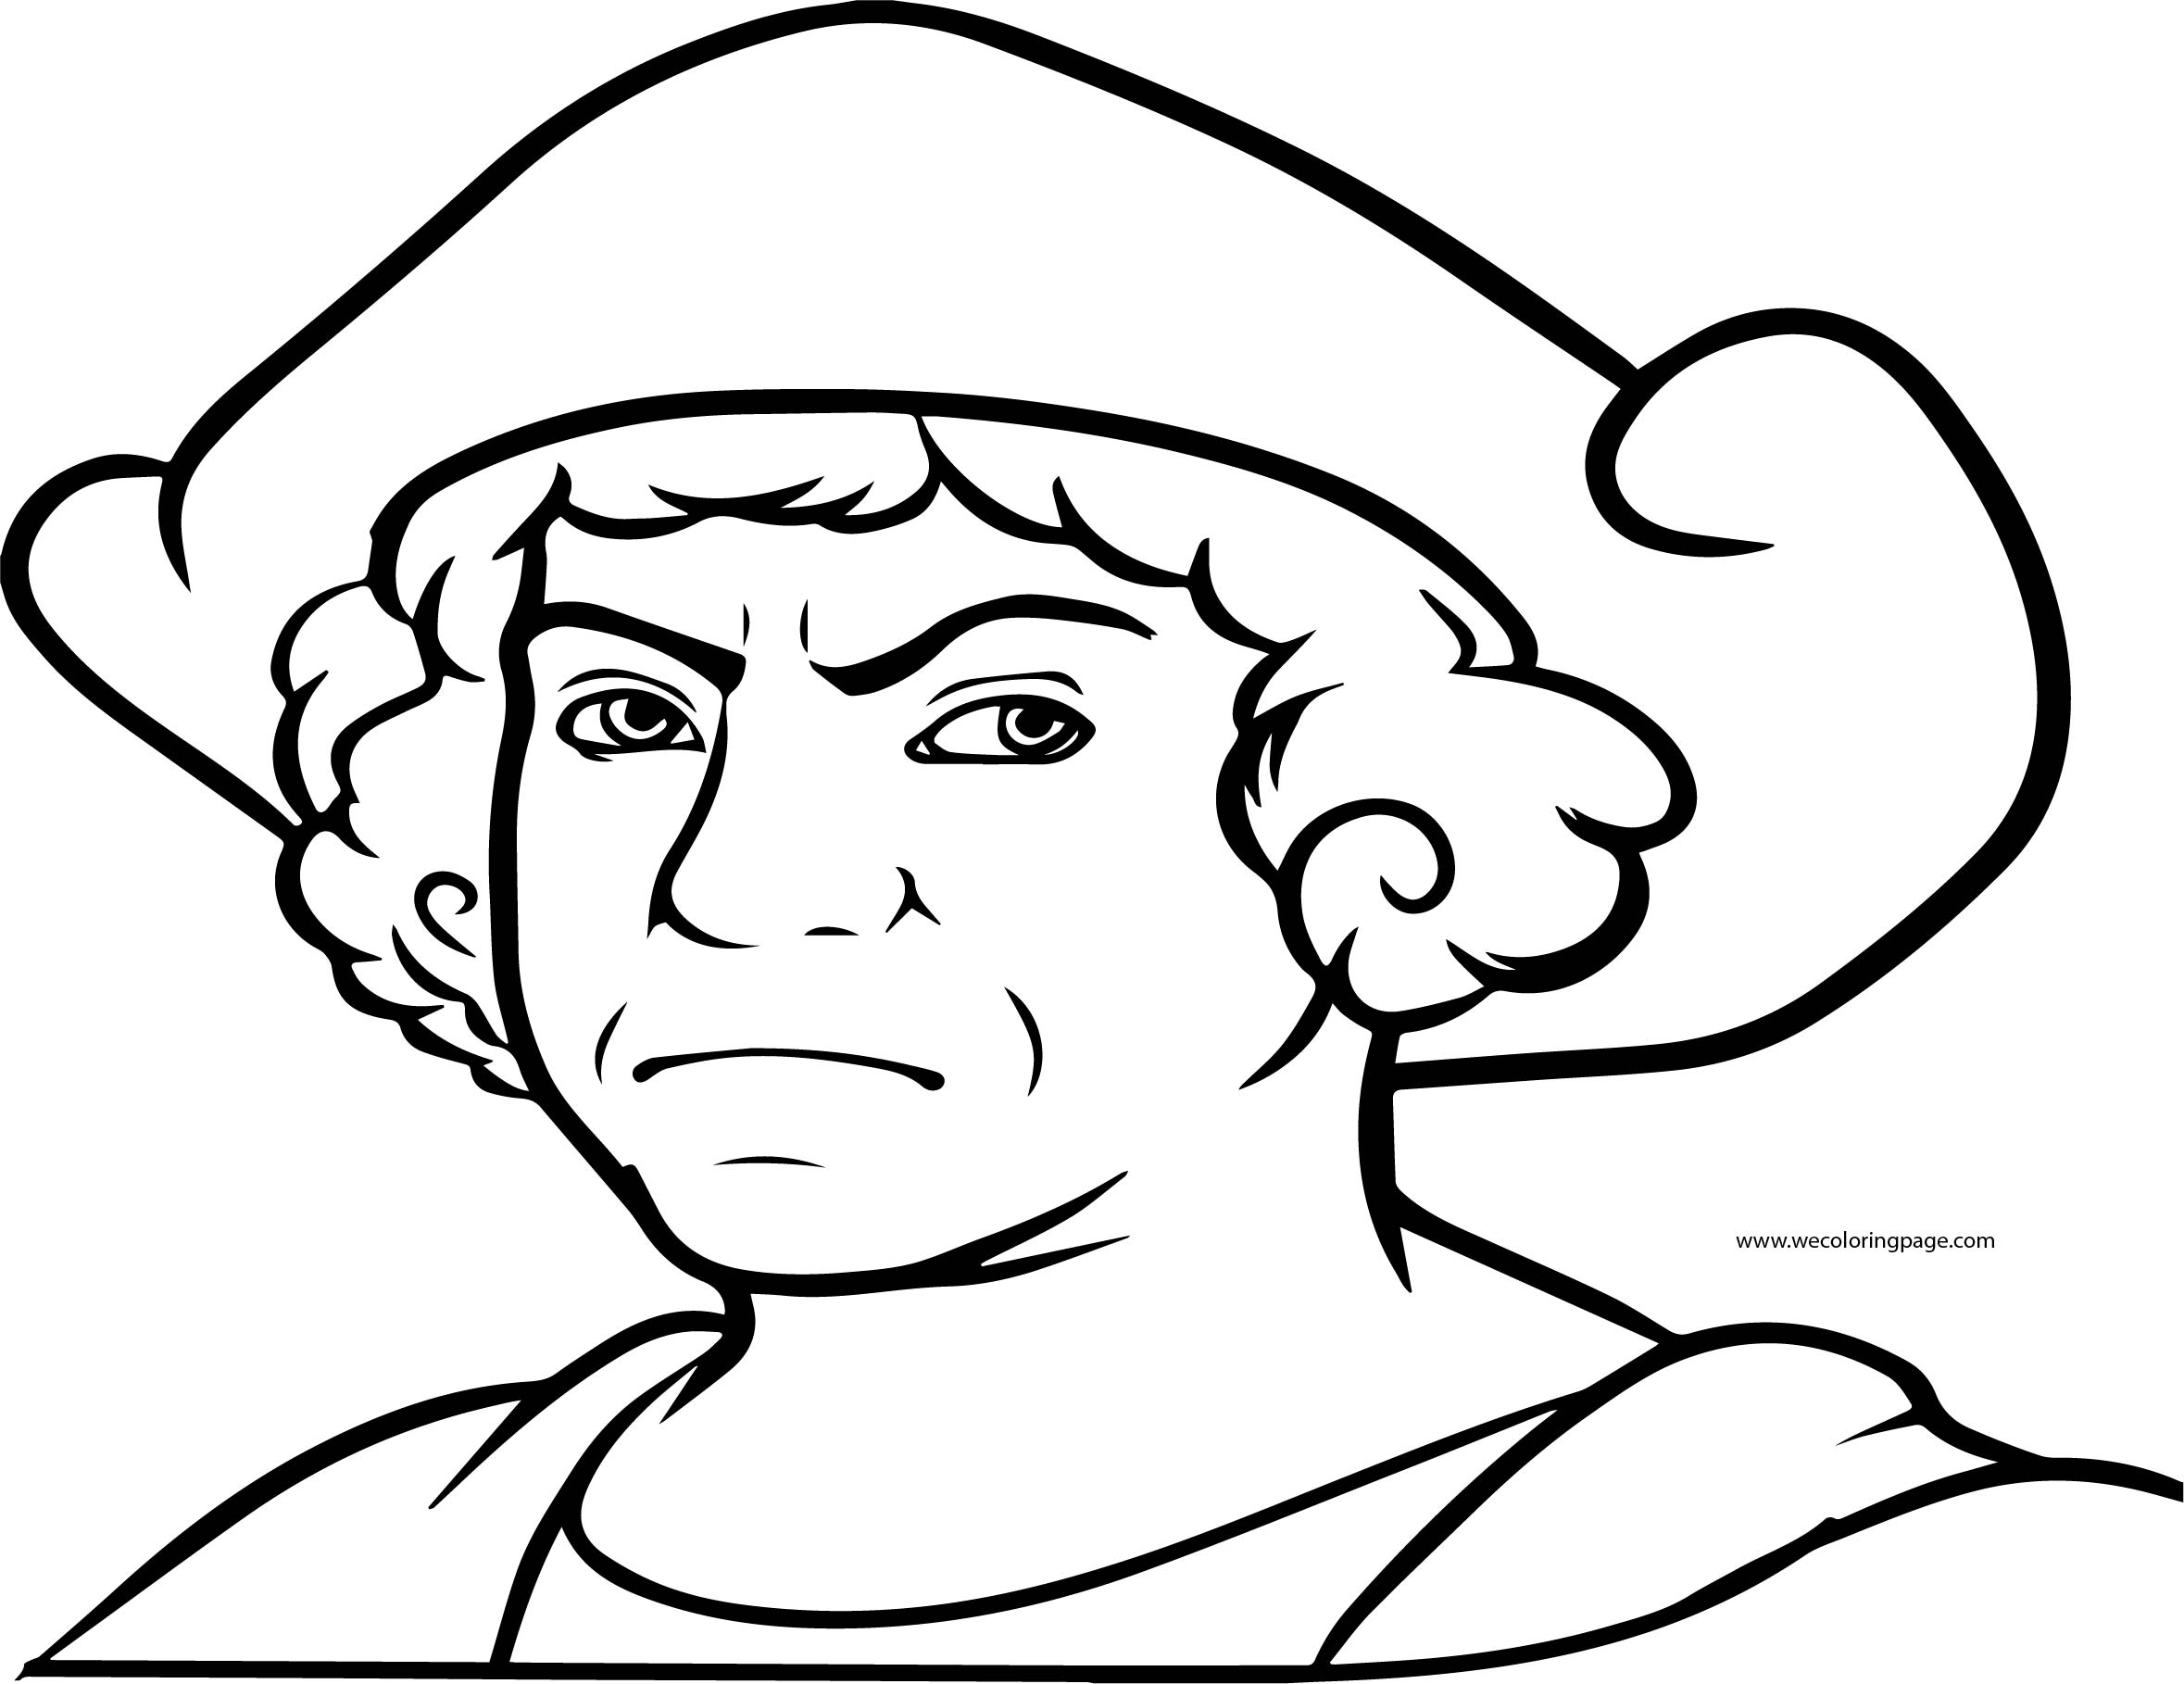 Christopher Columbus Coloring Pages Christopher Columbus Coloring Page Angry Wecoloringpage